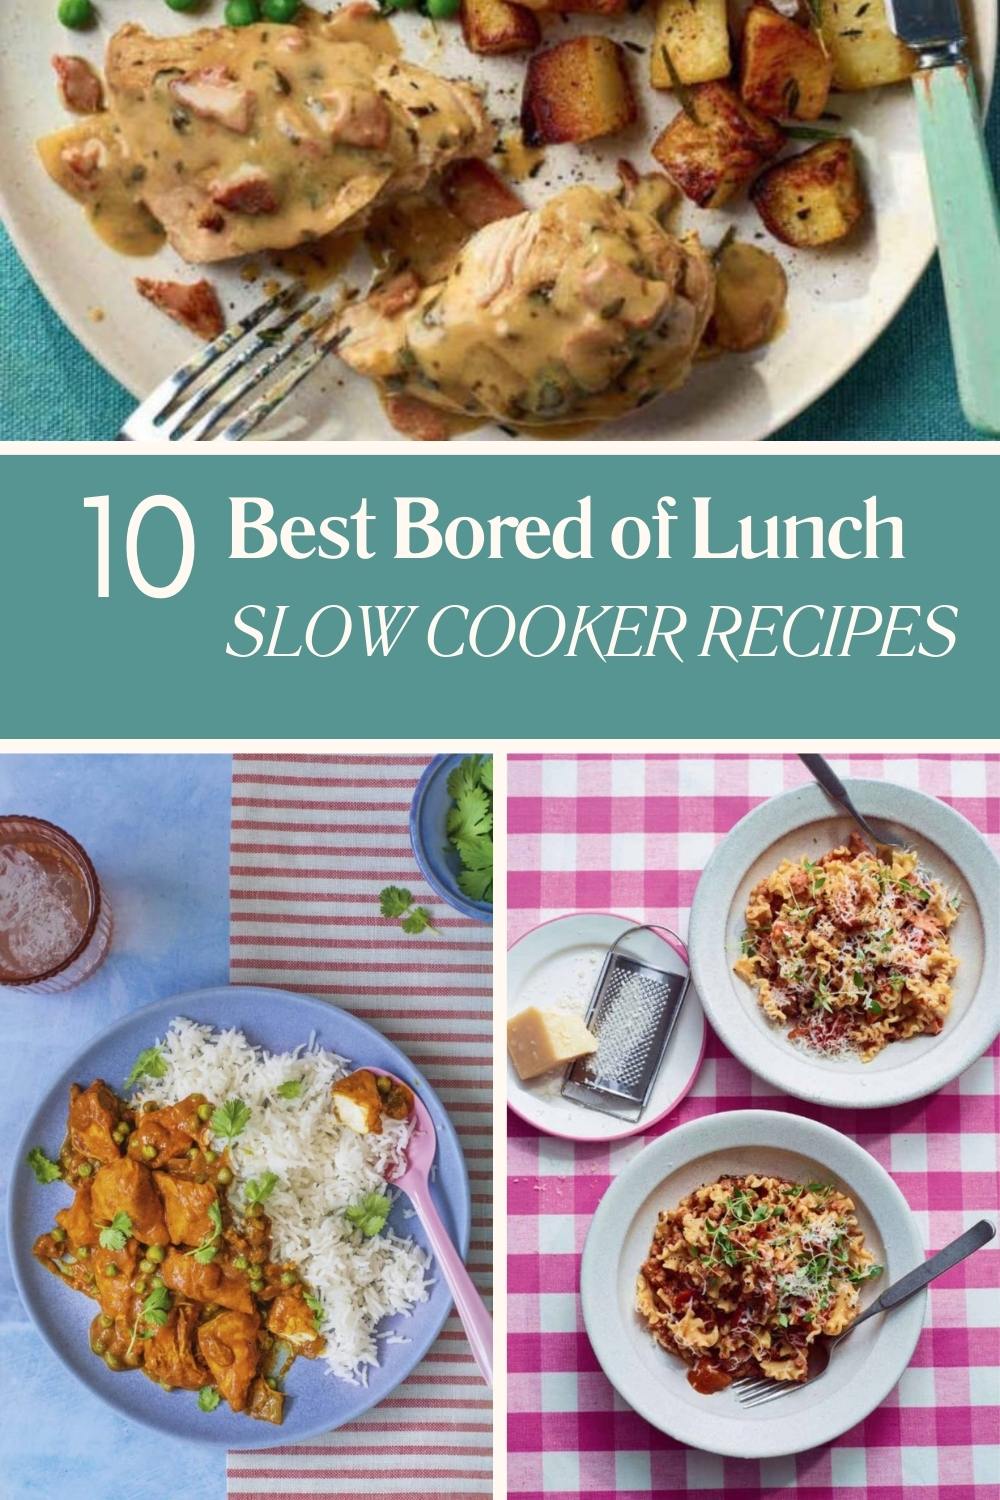 10 Best Bored of Lunch Slow Cooker Recipes